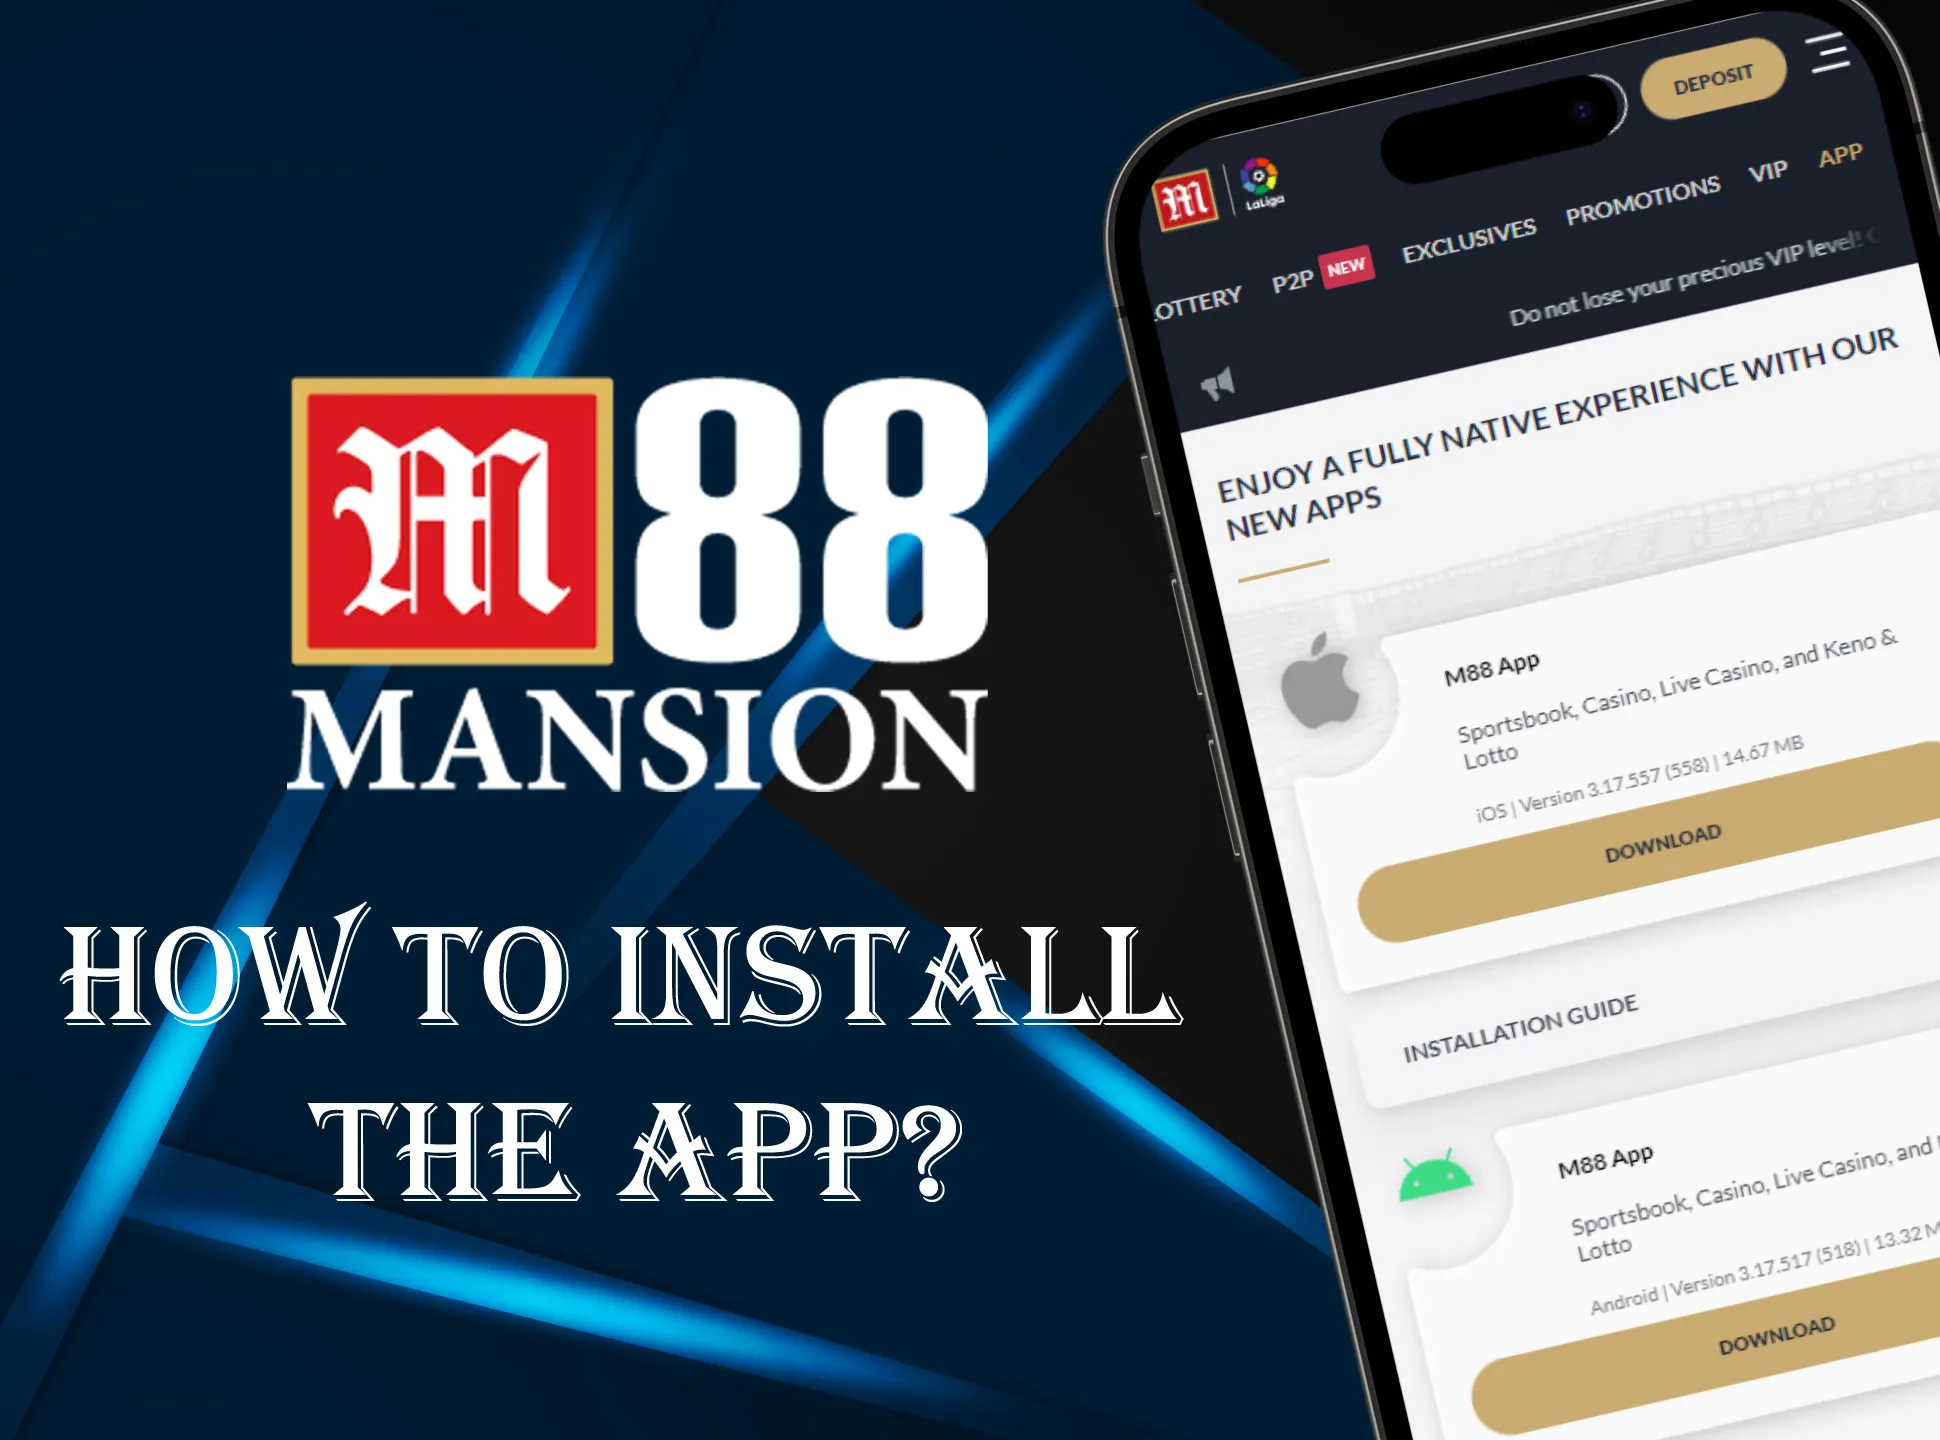 It's very easy to install M88 app.